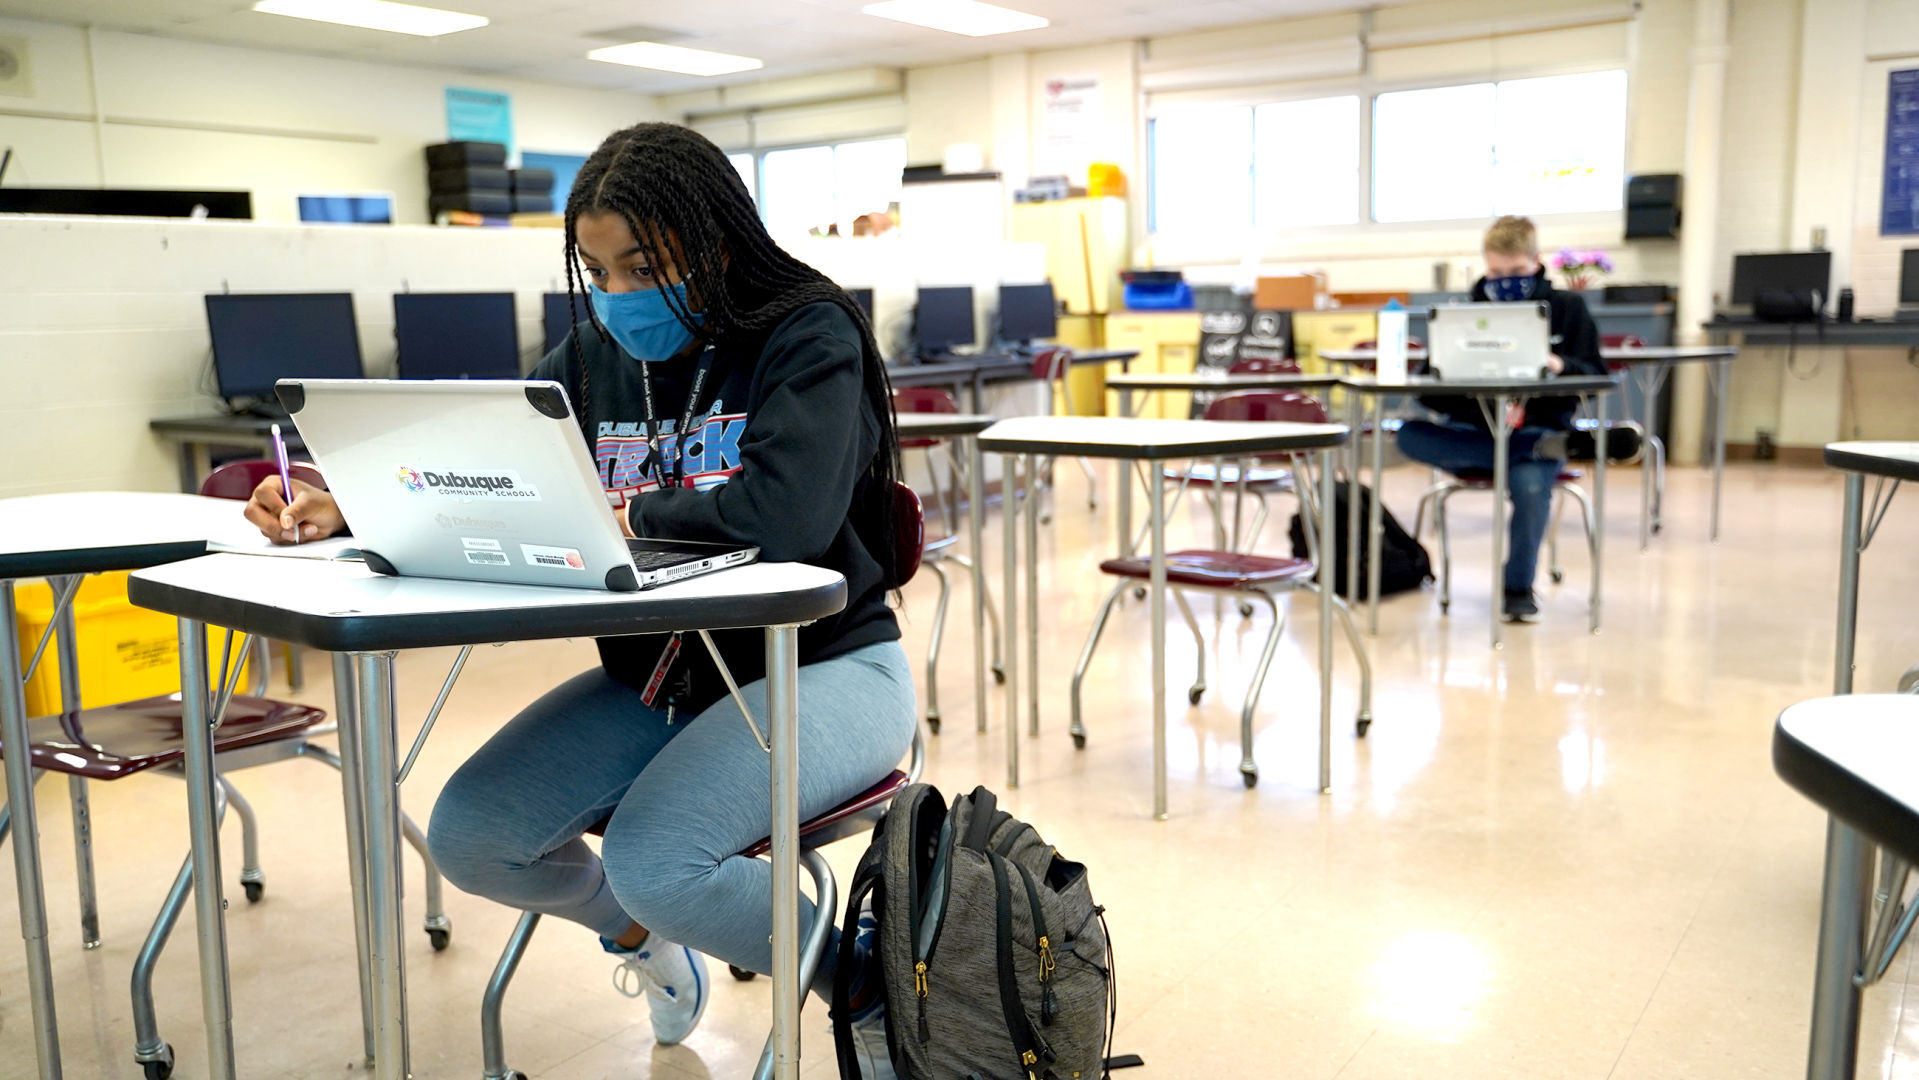 Aliyah Johnson, a junior at Dubuque Senior High School, attends an Advanced Placement computer science course at the school on Tuesday, Jan. 19, 2021. PHOTO CREDIT: Paul Kurutsides